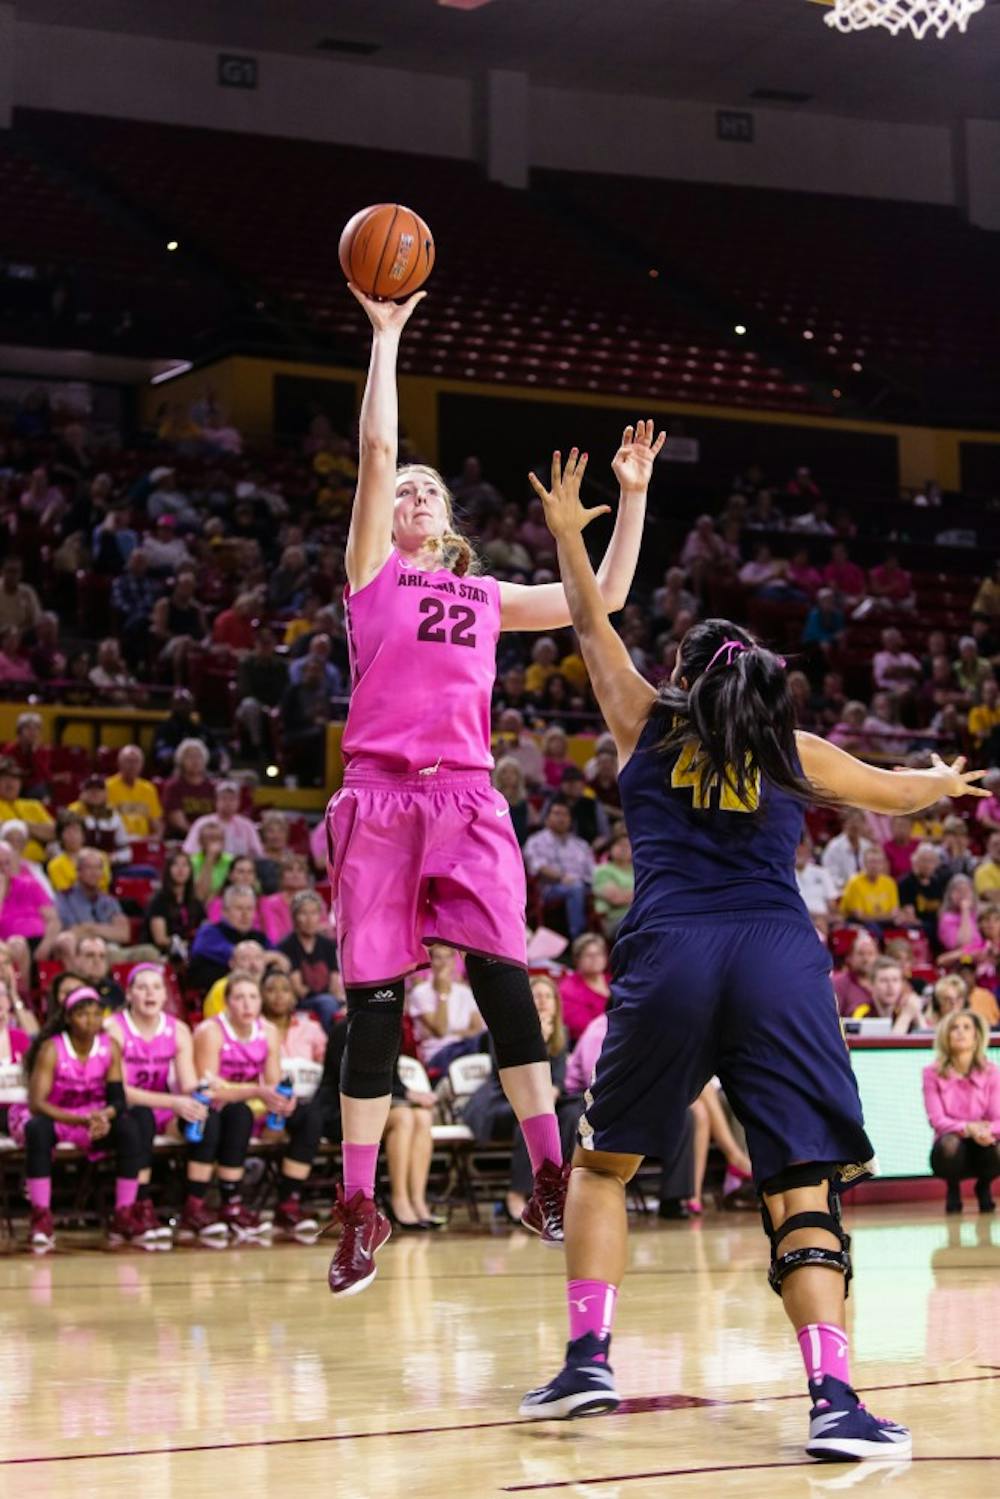 ASU sophomore center Quinn Dornstauder shoots over Cal senior forward Justine Hartman at Wells Fargo Arena on Feb. 8, 2015. ASU would have a cold night offensively shooting just 32.3 percent from the field as they fell to the Golden Bears 50-49. (Daniel Kwon/The State Press)